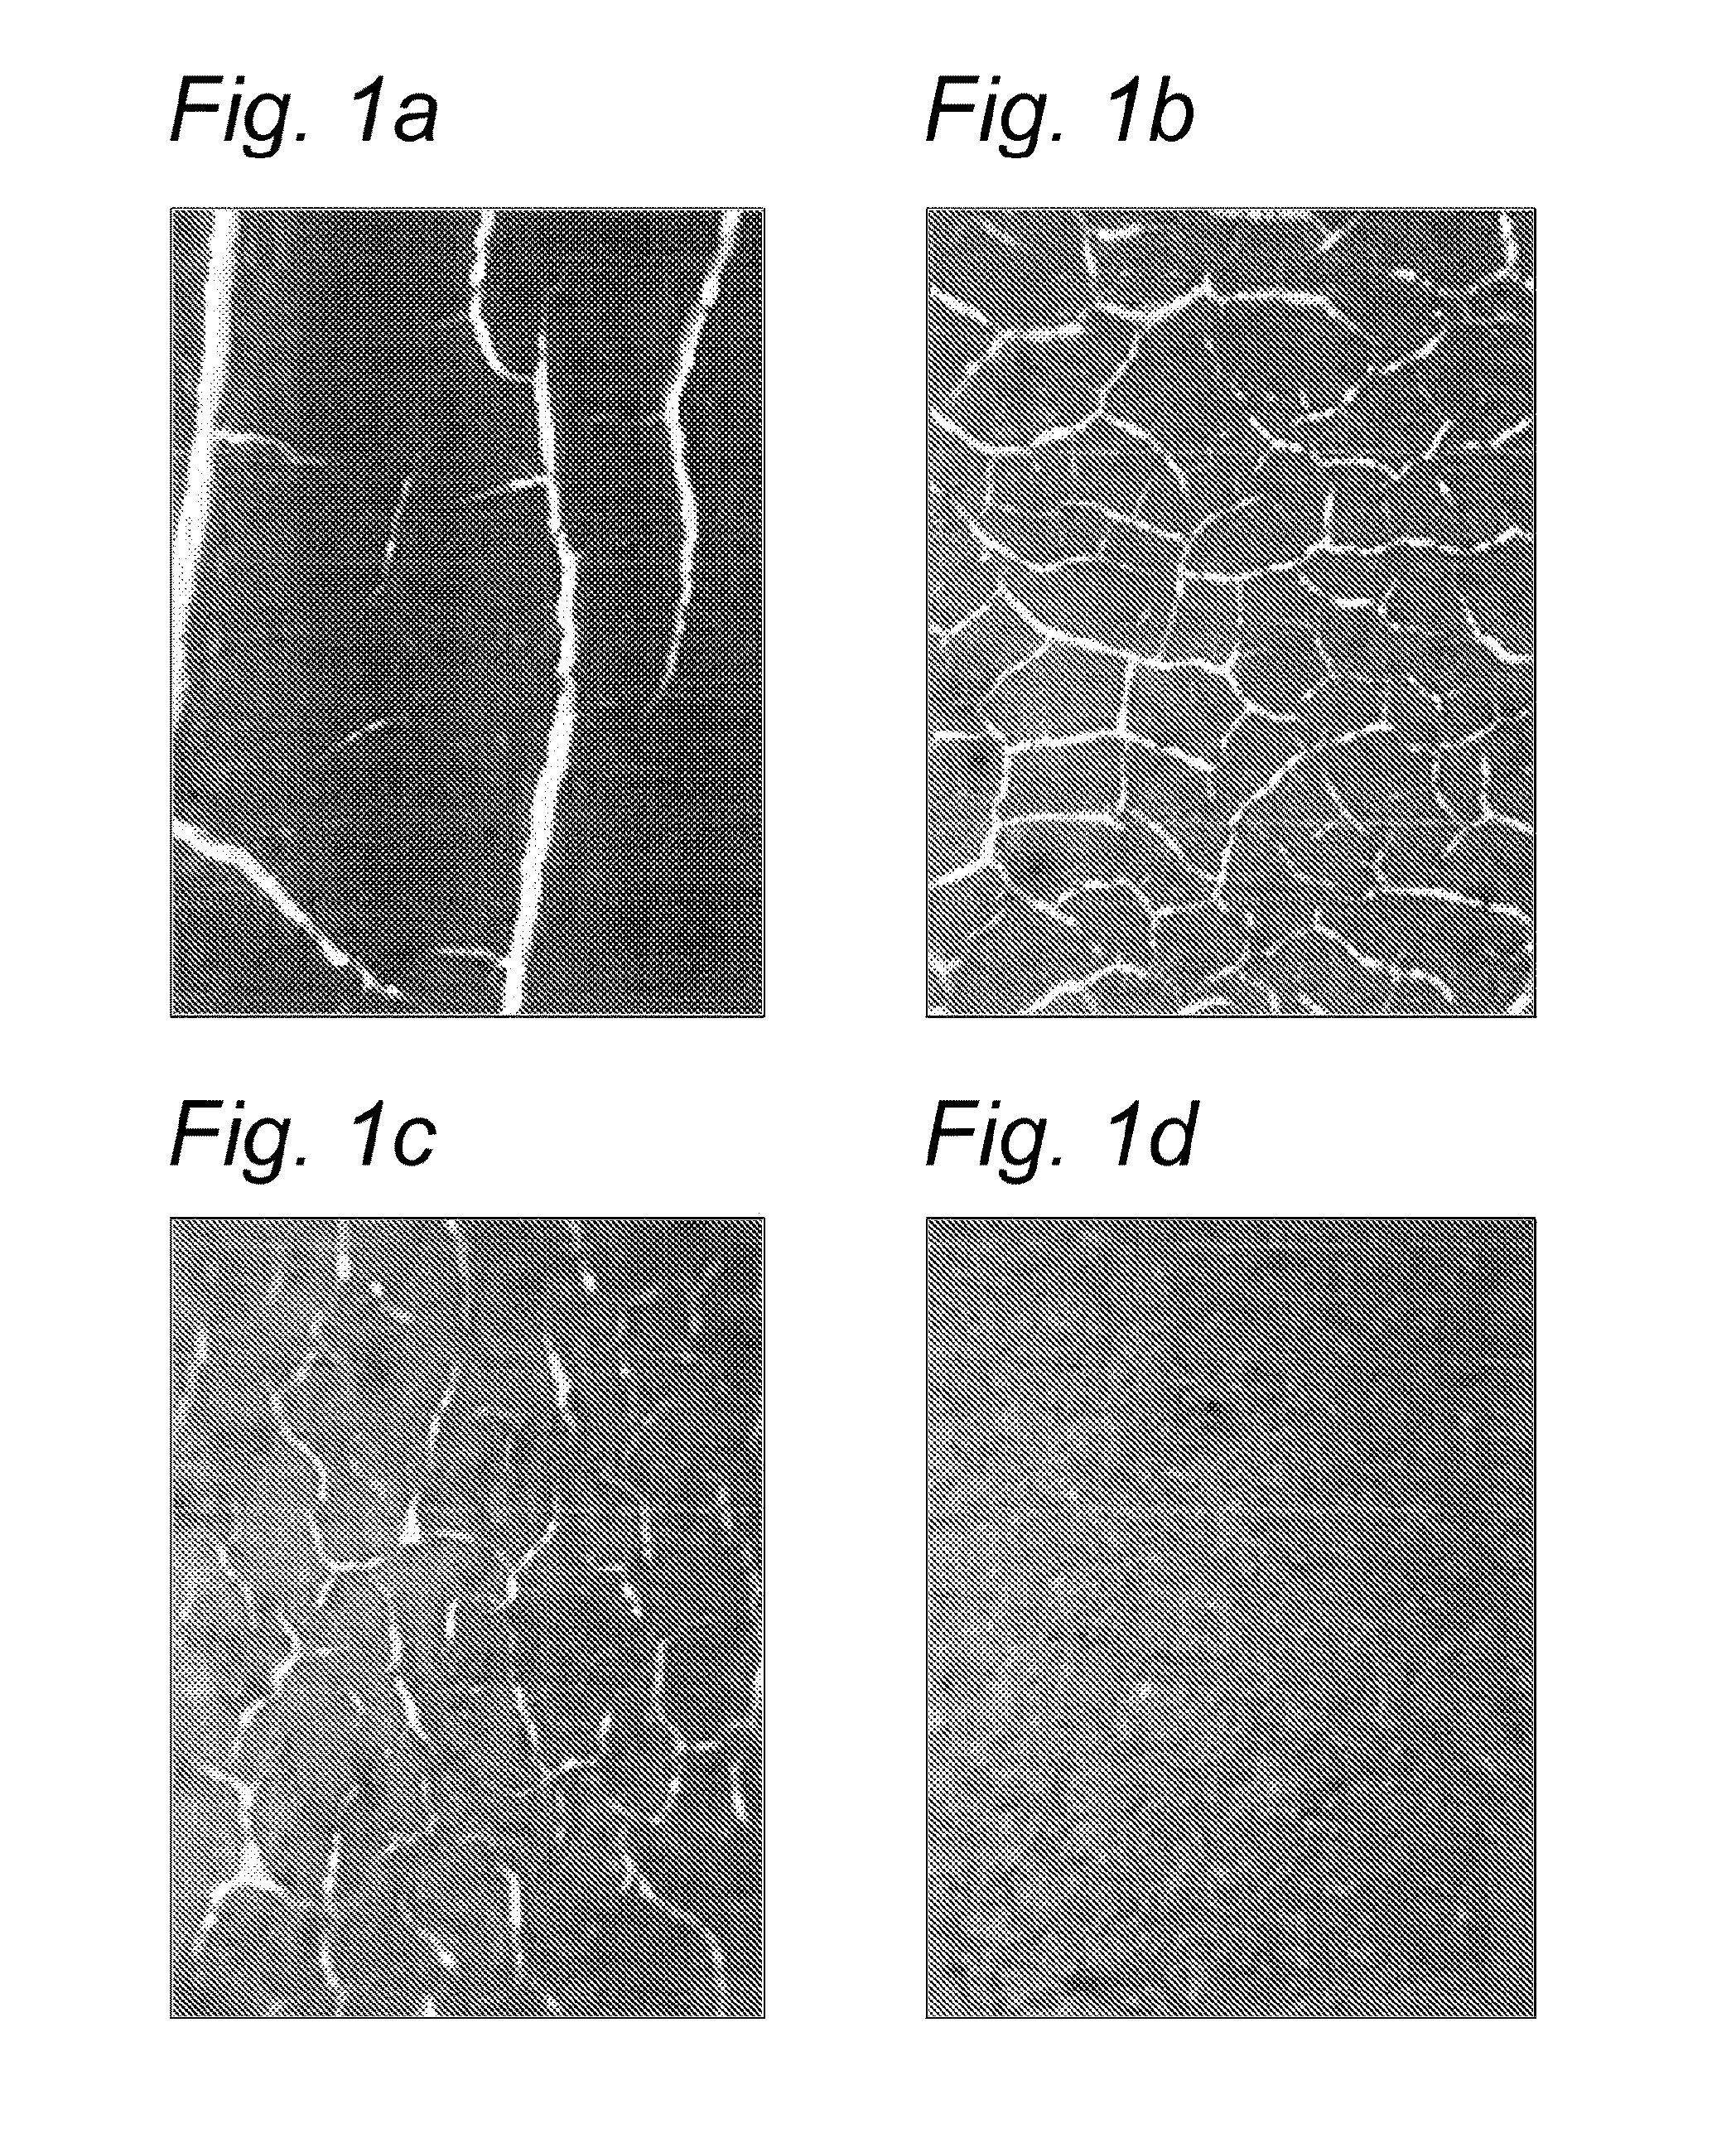 Anti-cracking agent for water-borne acrylic paint and coating compositions